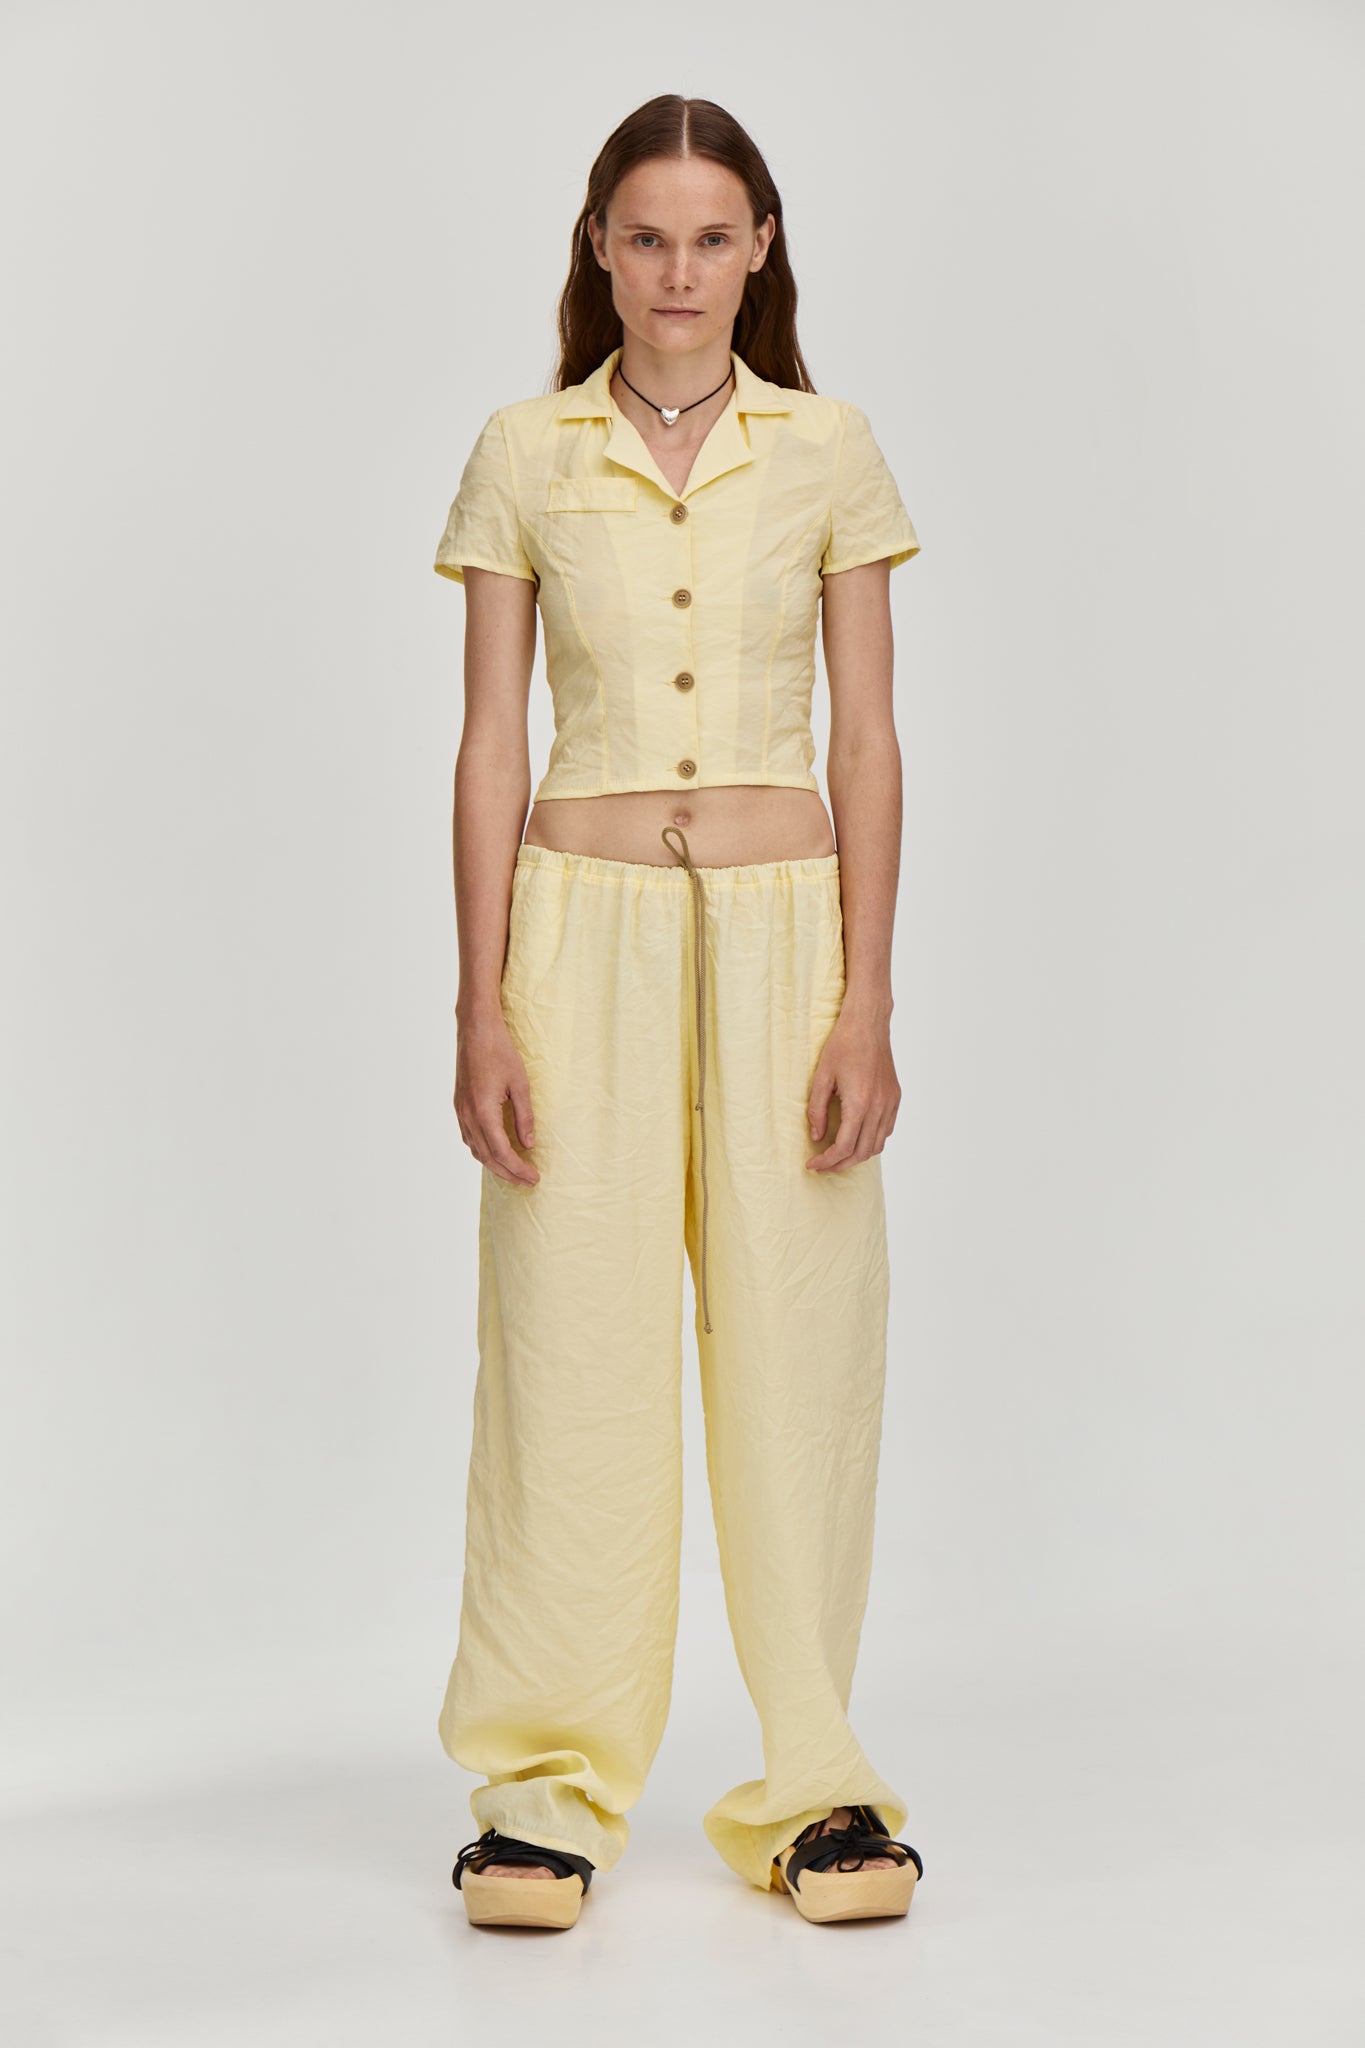 Lapel collar cropped blazer jacket with short sleeves from FORMA brand